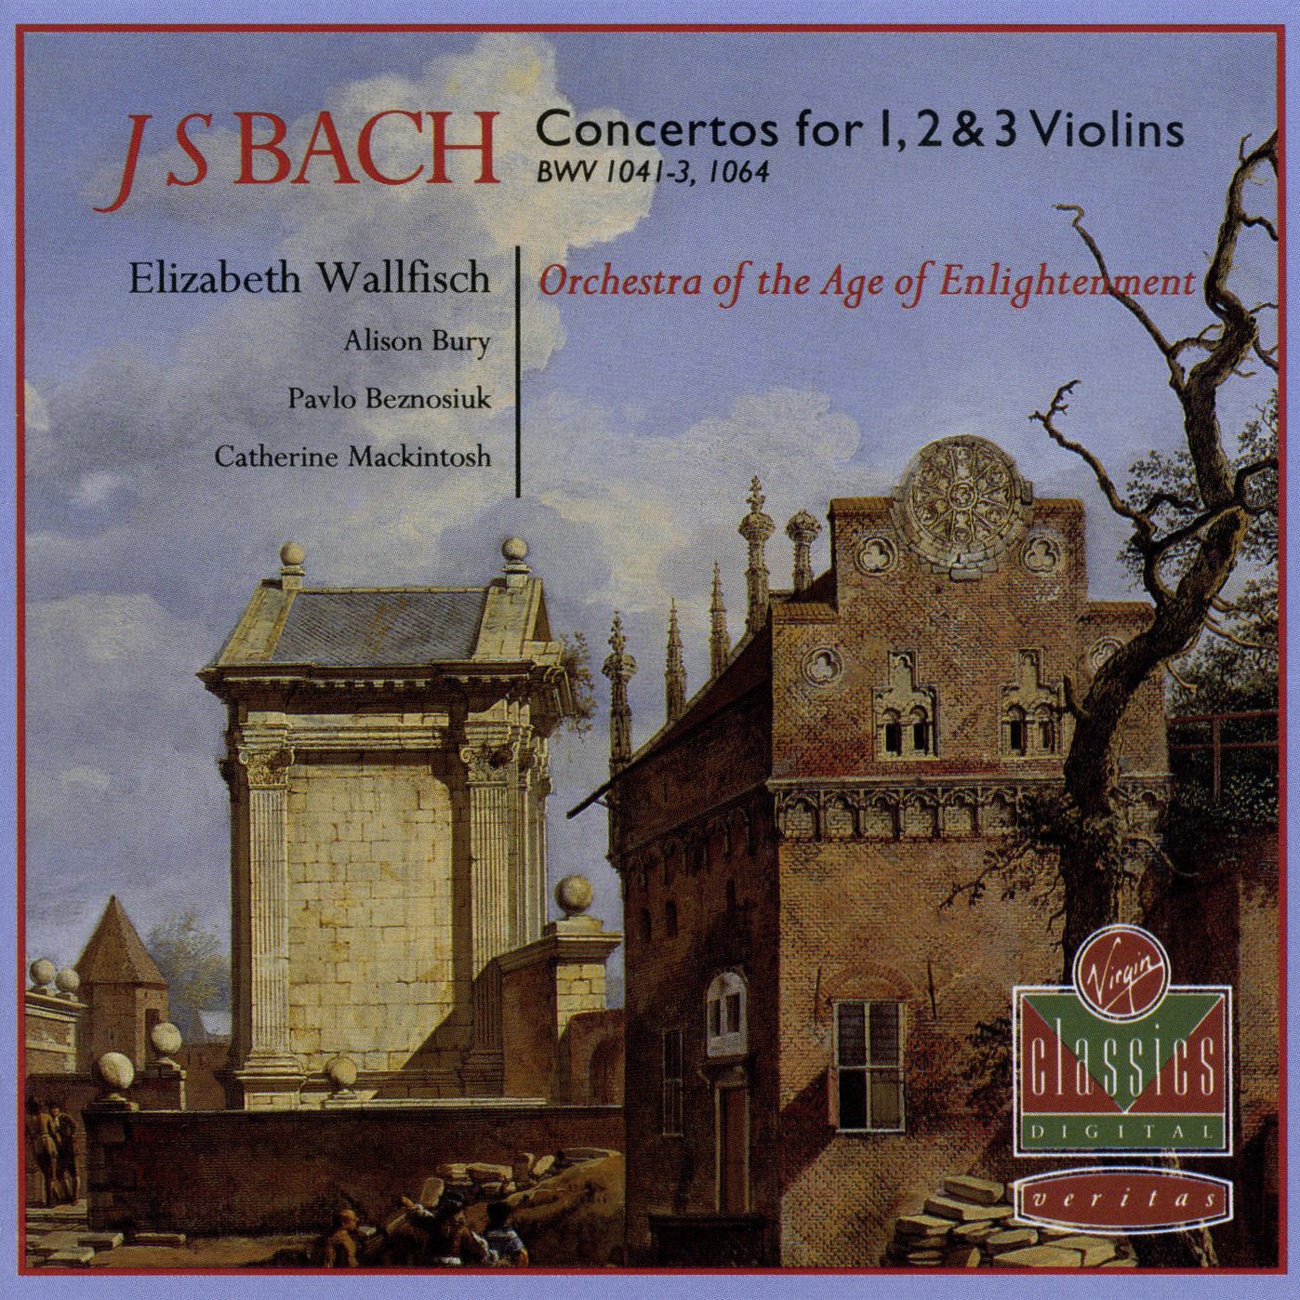 Concerto in D for 3 violins (reconstructed from Concerto for 3 harpsichords in C) BWV 1064: I.       Allegro